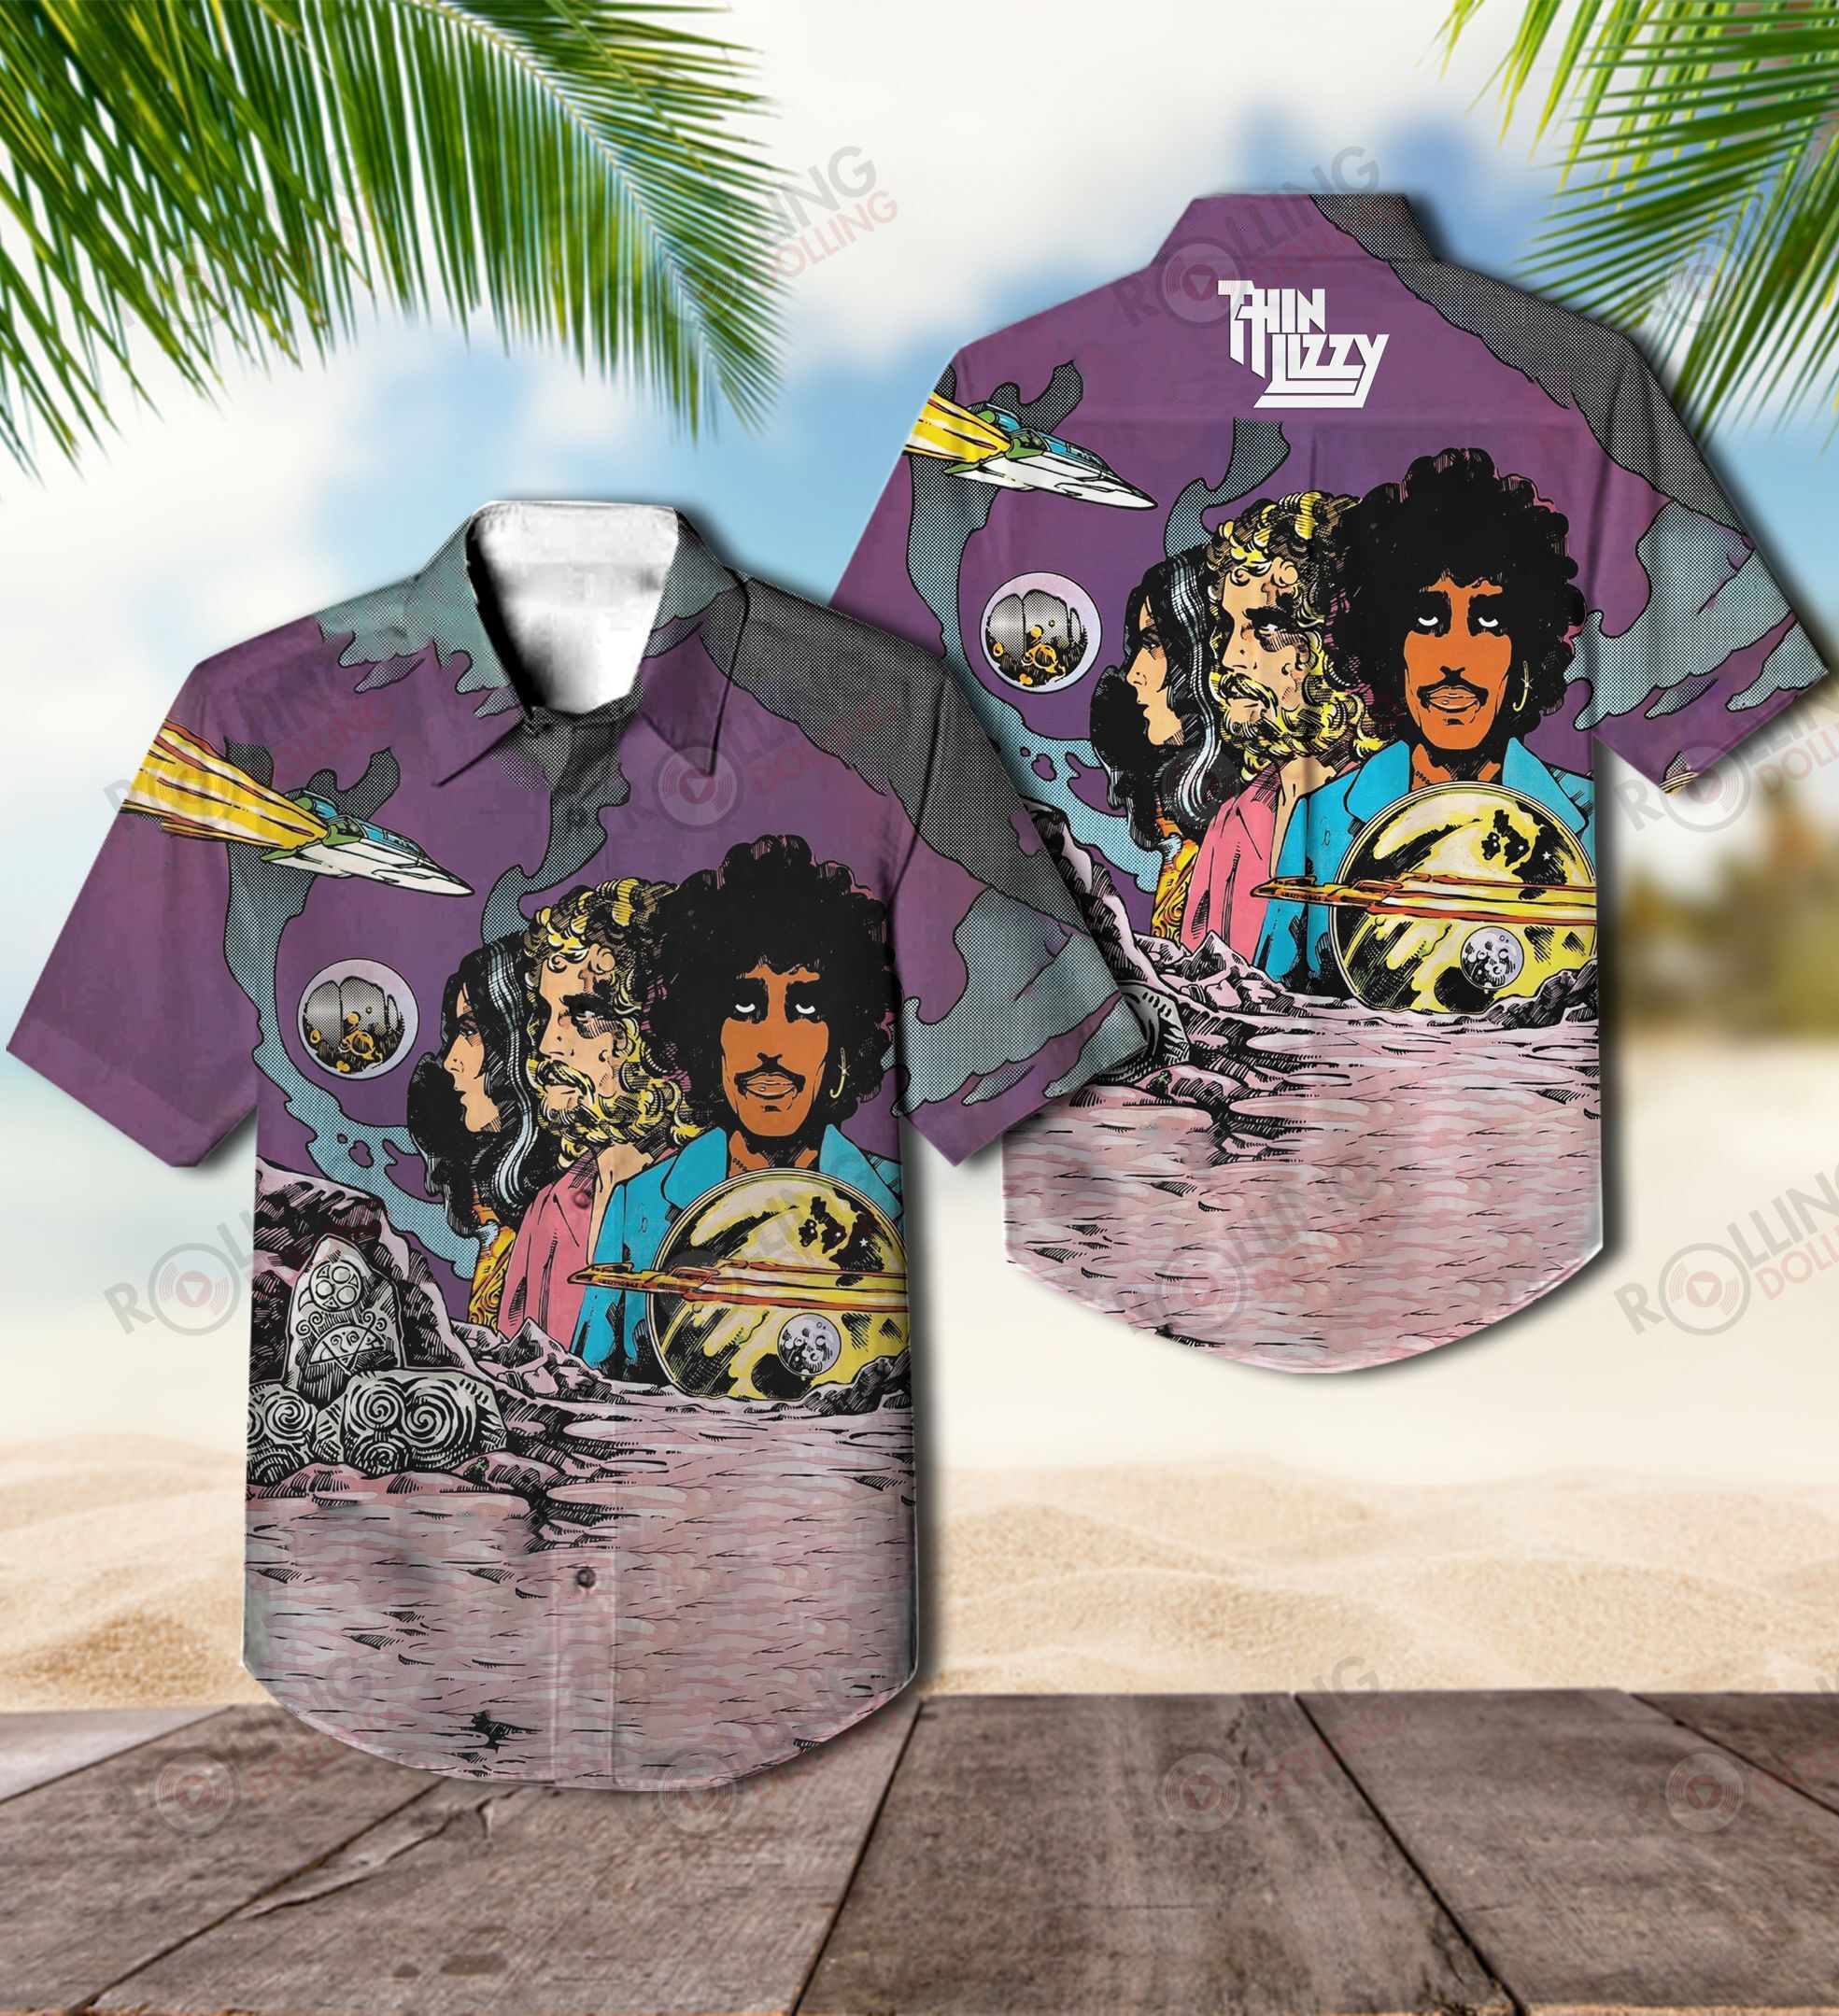 For summer, consider wearing This Amazing Hawaiian Shirt shirt in our store 79